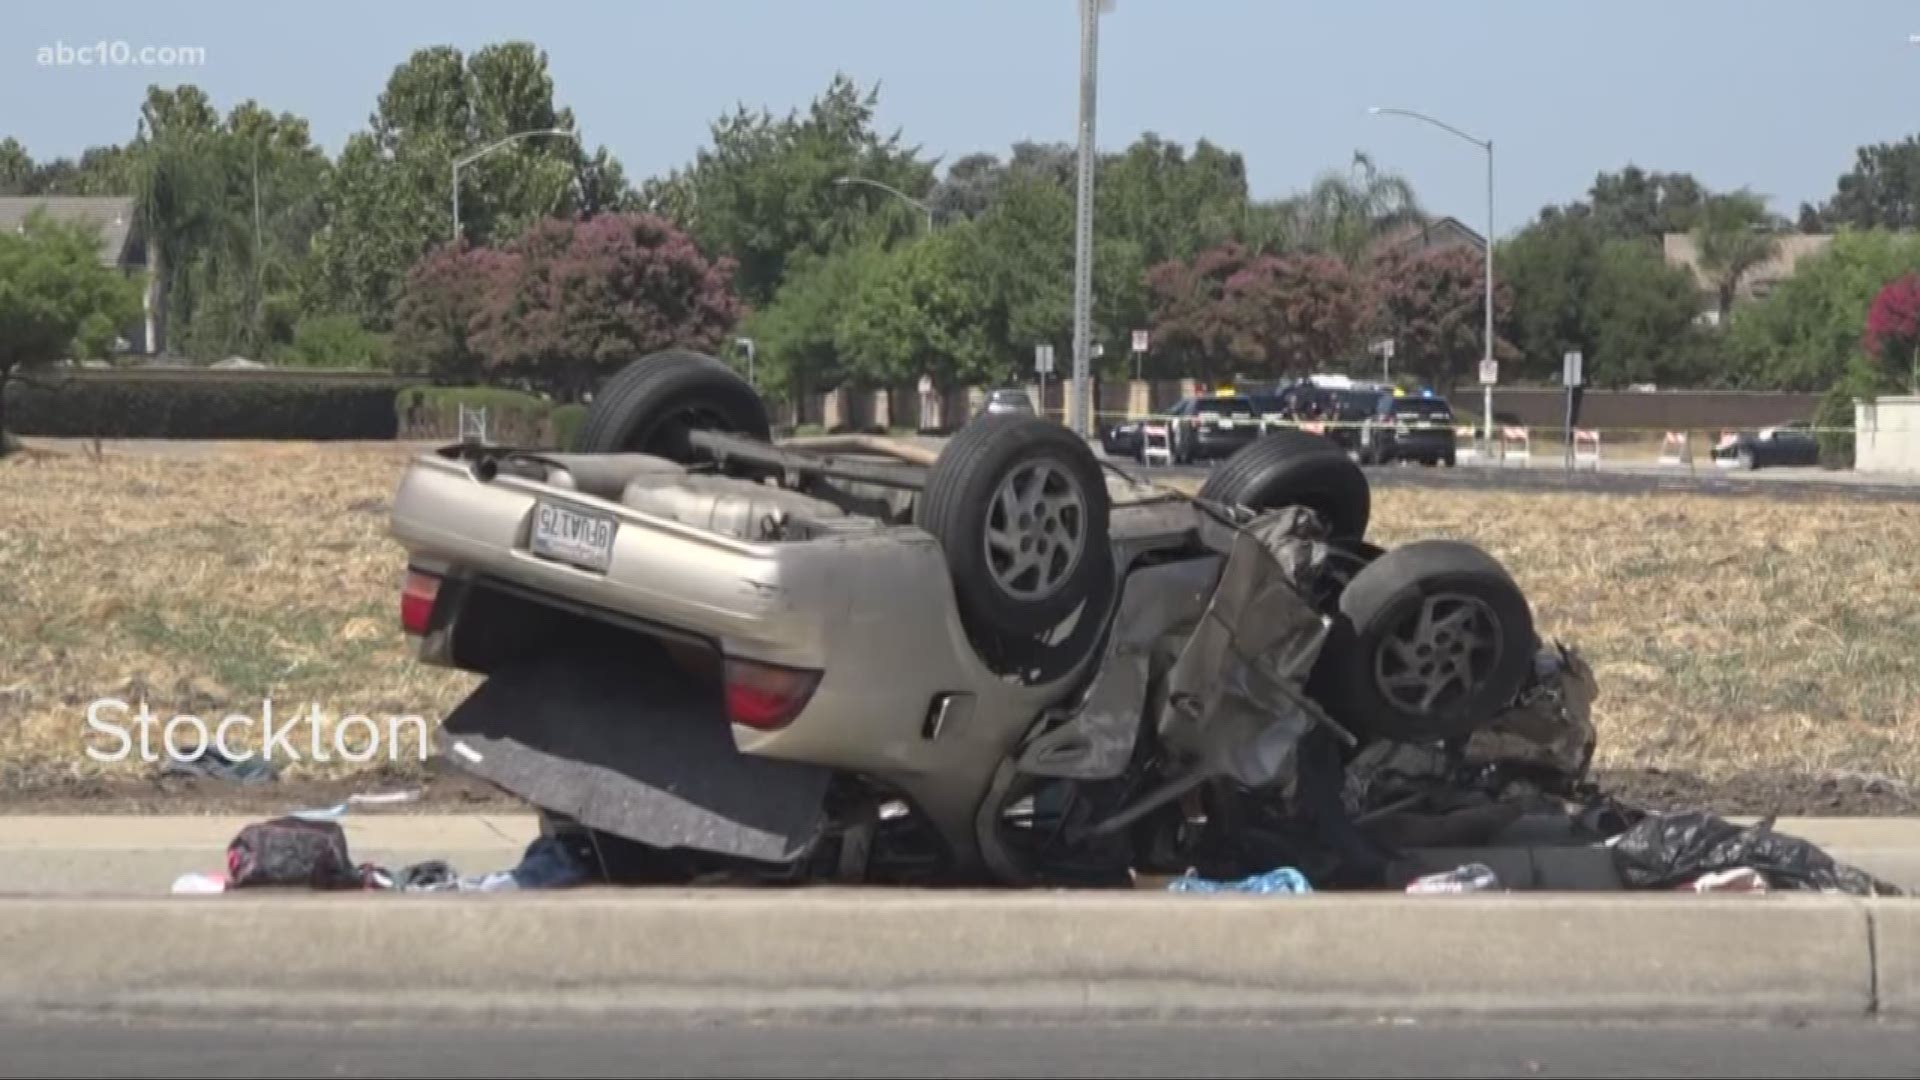 Two people suffered major injuries and another person suffered minor injuries following a high-speed chase that ended in a crash in Stockton on Tuesday.